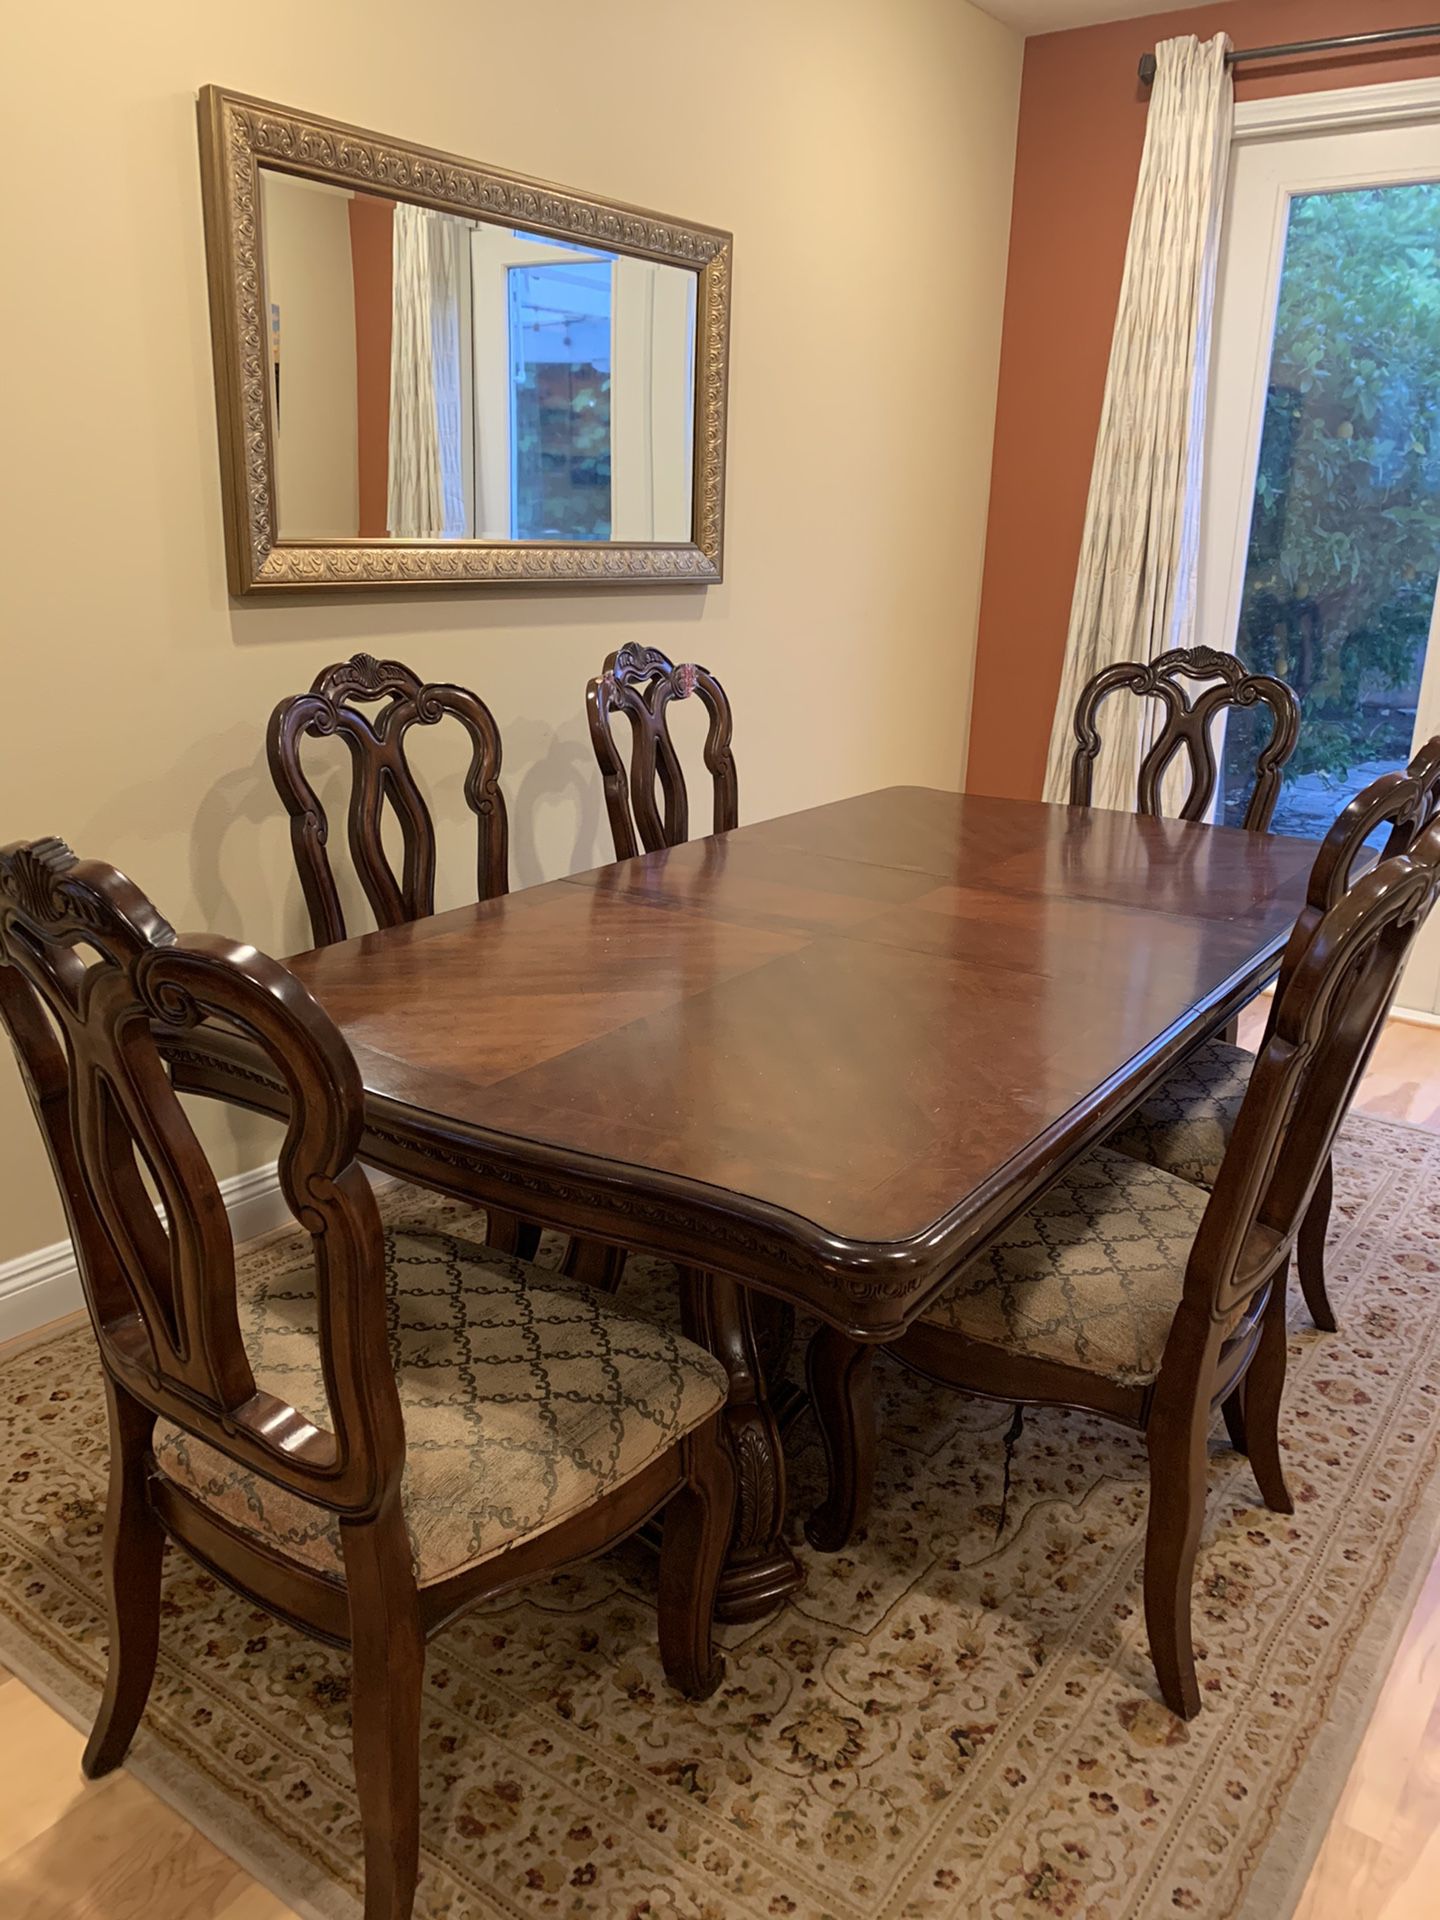 Formal dining table with 4 chairs plus area rug